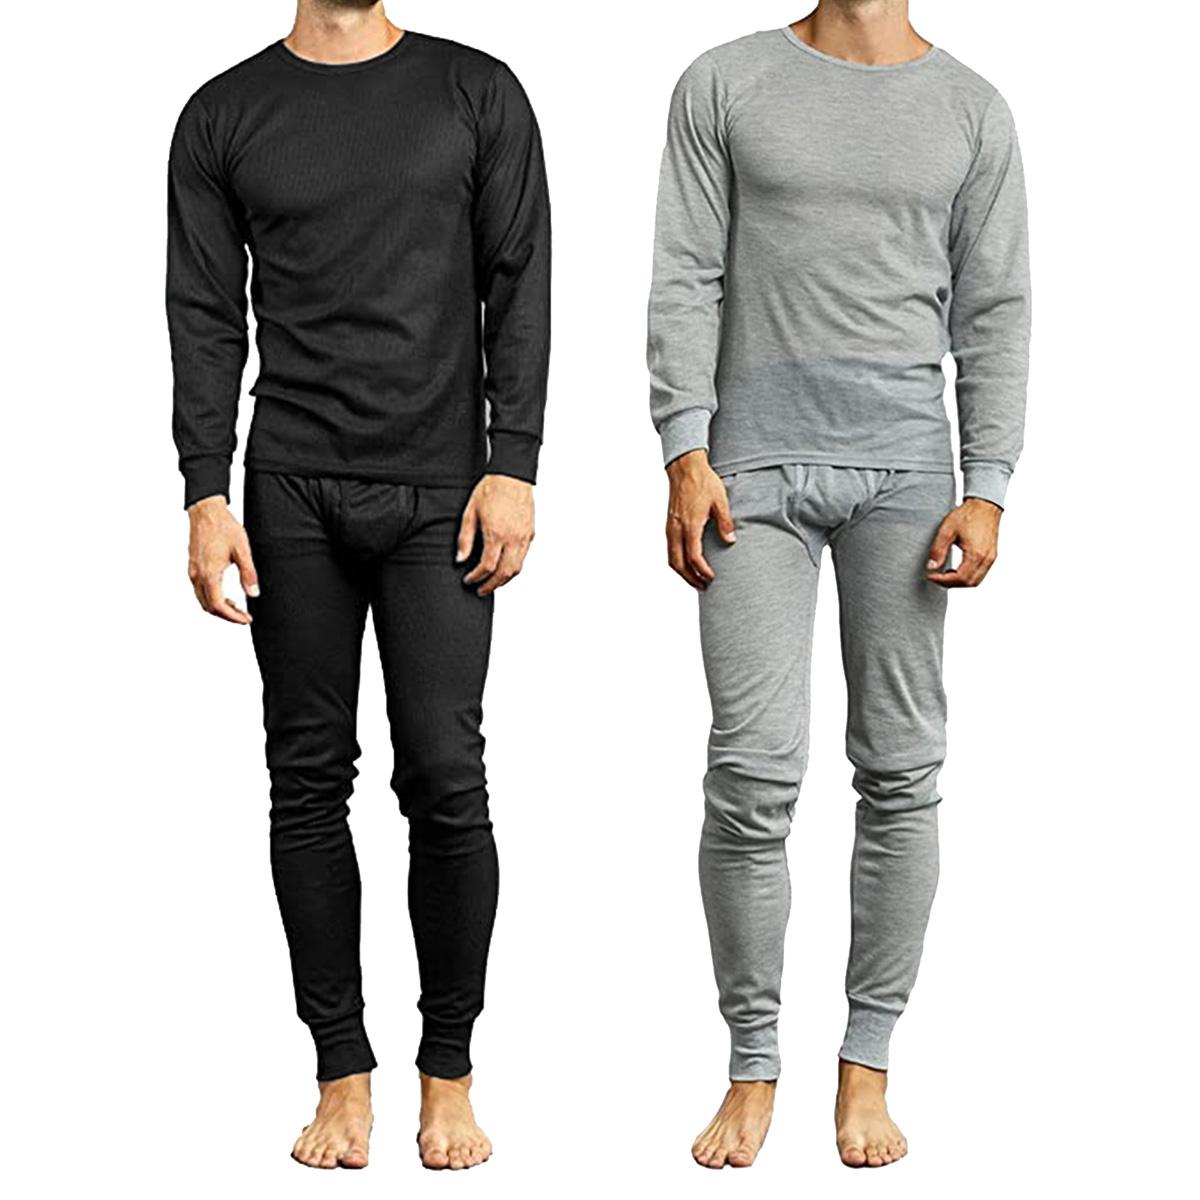 Galaxy By Harvic 4-Piece Mens Winter Thermal Base Layer Set for $14.99